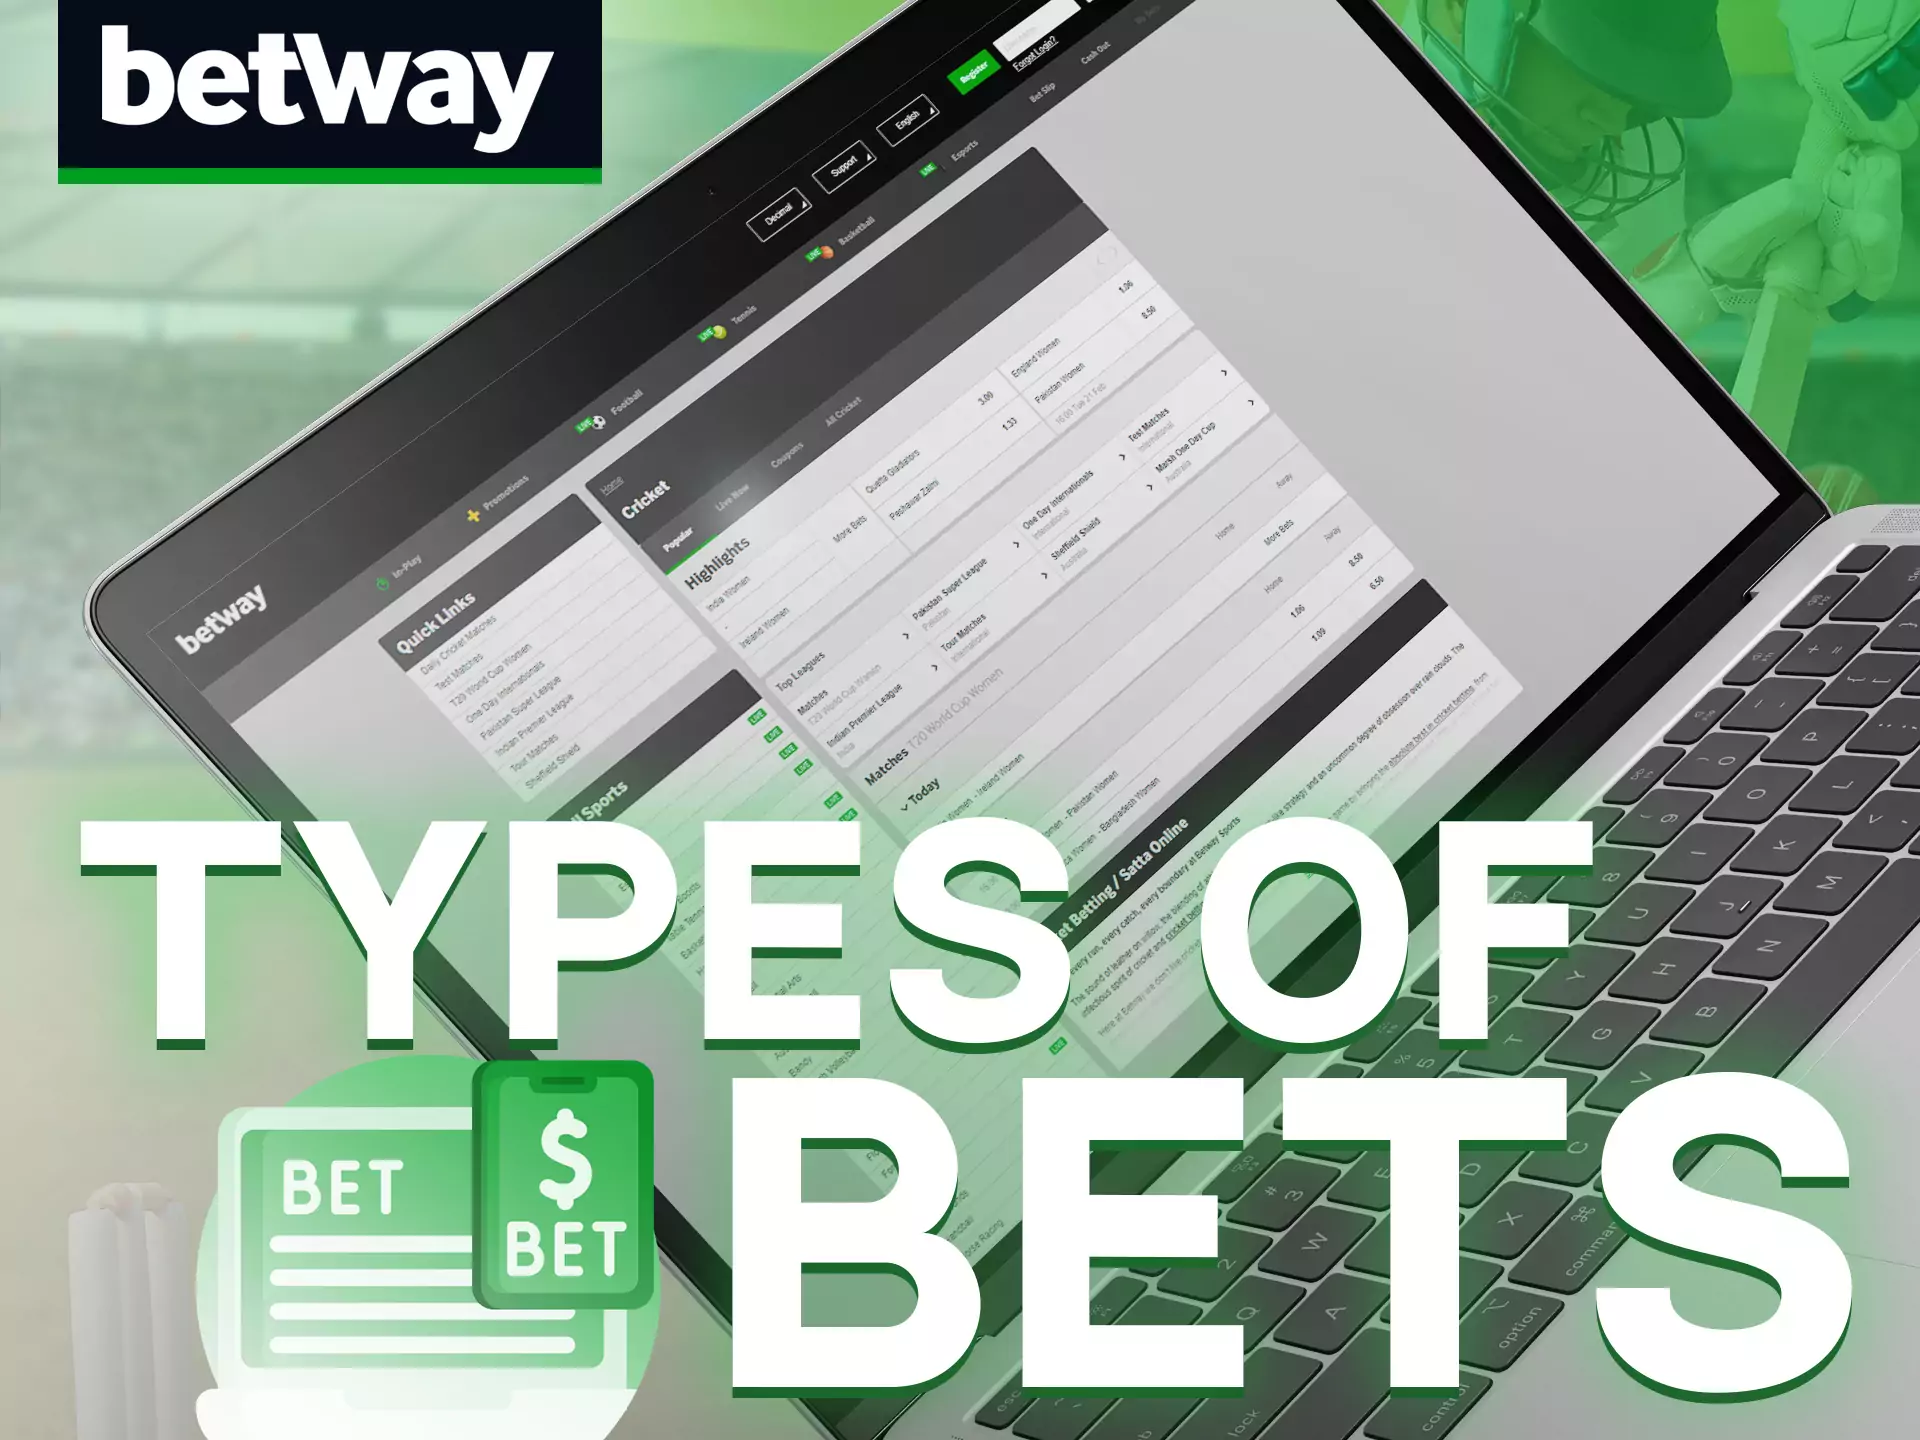 Bet how you want with Betway.